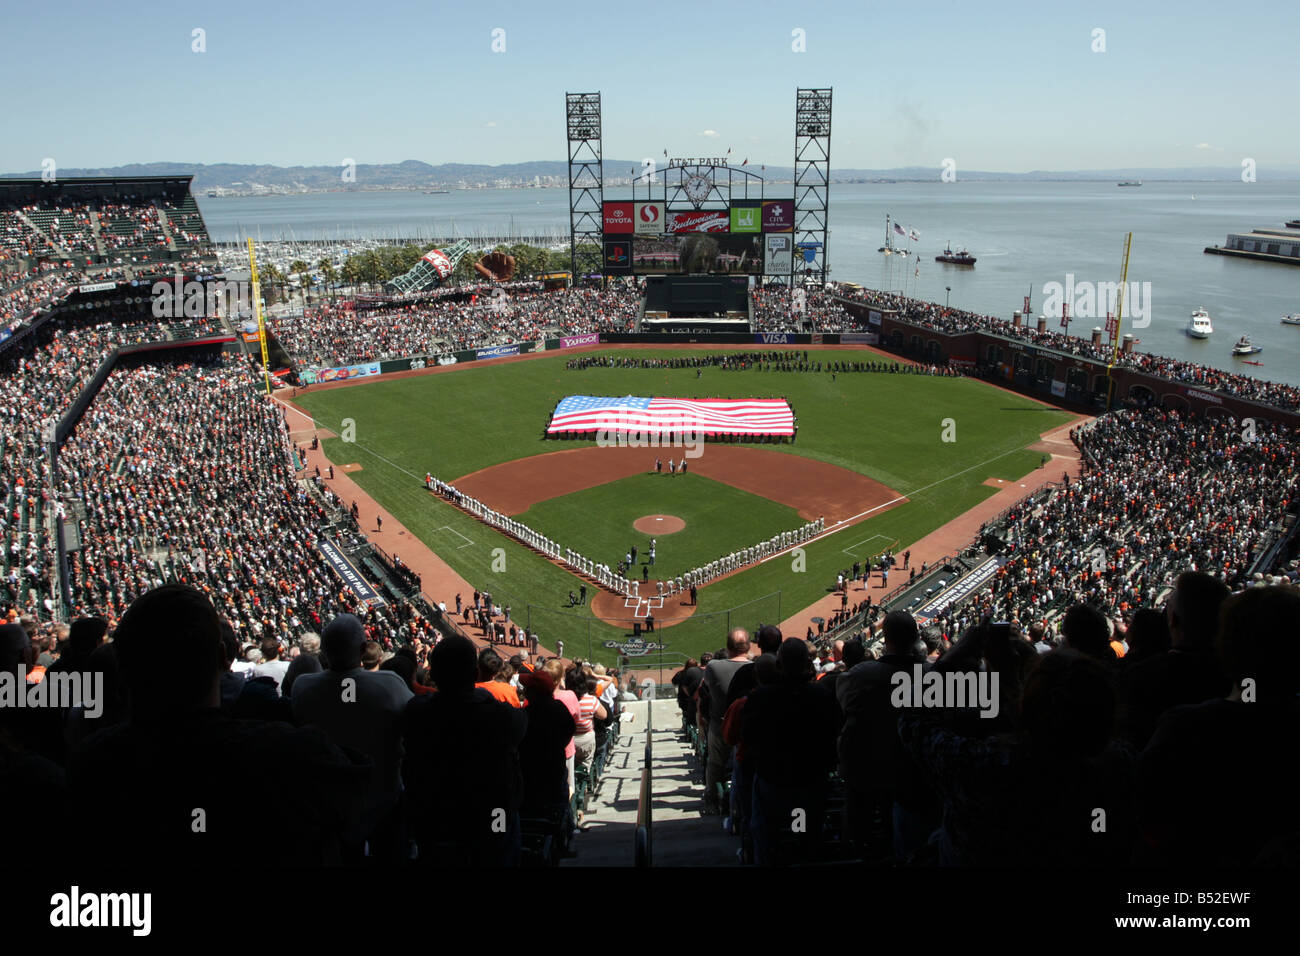 AT&T Park celebrates the 50th anniversary of the San Francisco Giants on Opening Day of the baseball season on April 7 2008. Stock Photo